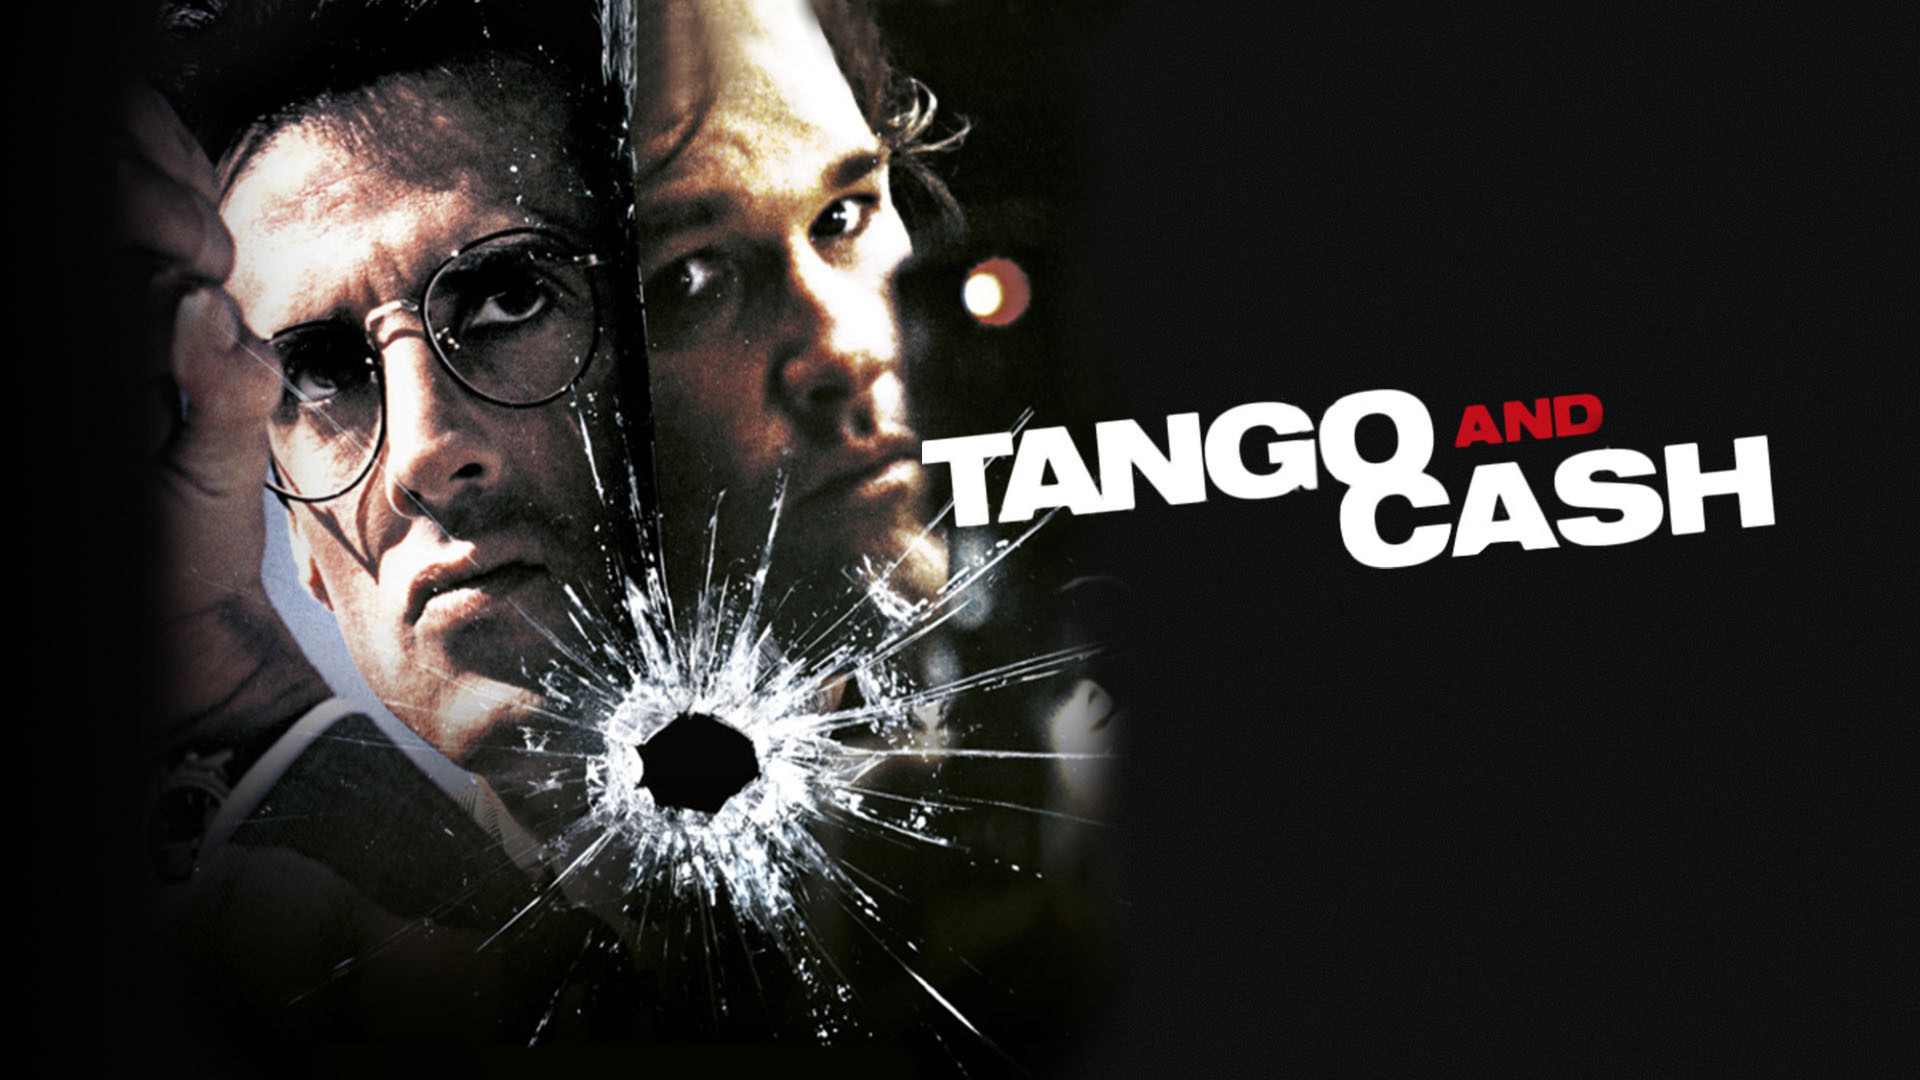 Tango and Cash, Sylvester Stallone, Kurt Russell, Action-packed, 1920x1080 Full HD Desktop